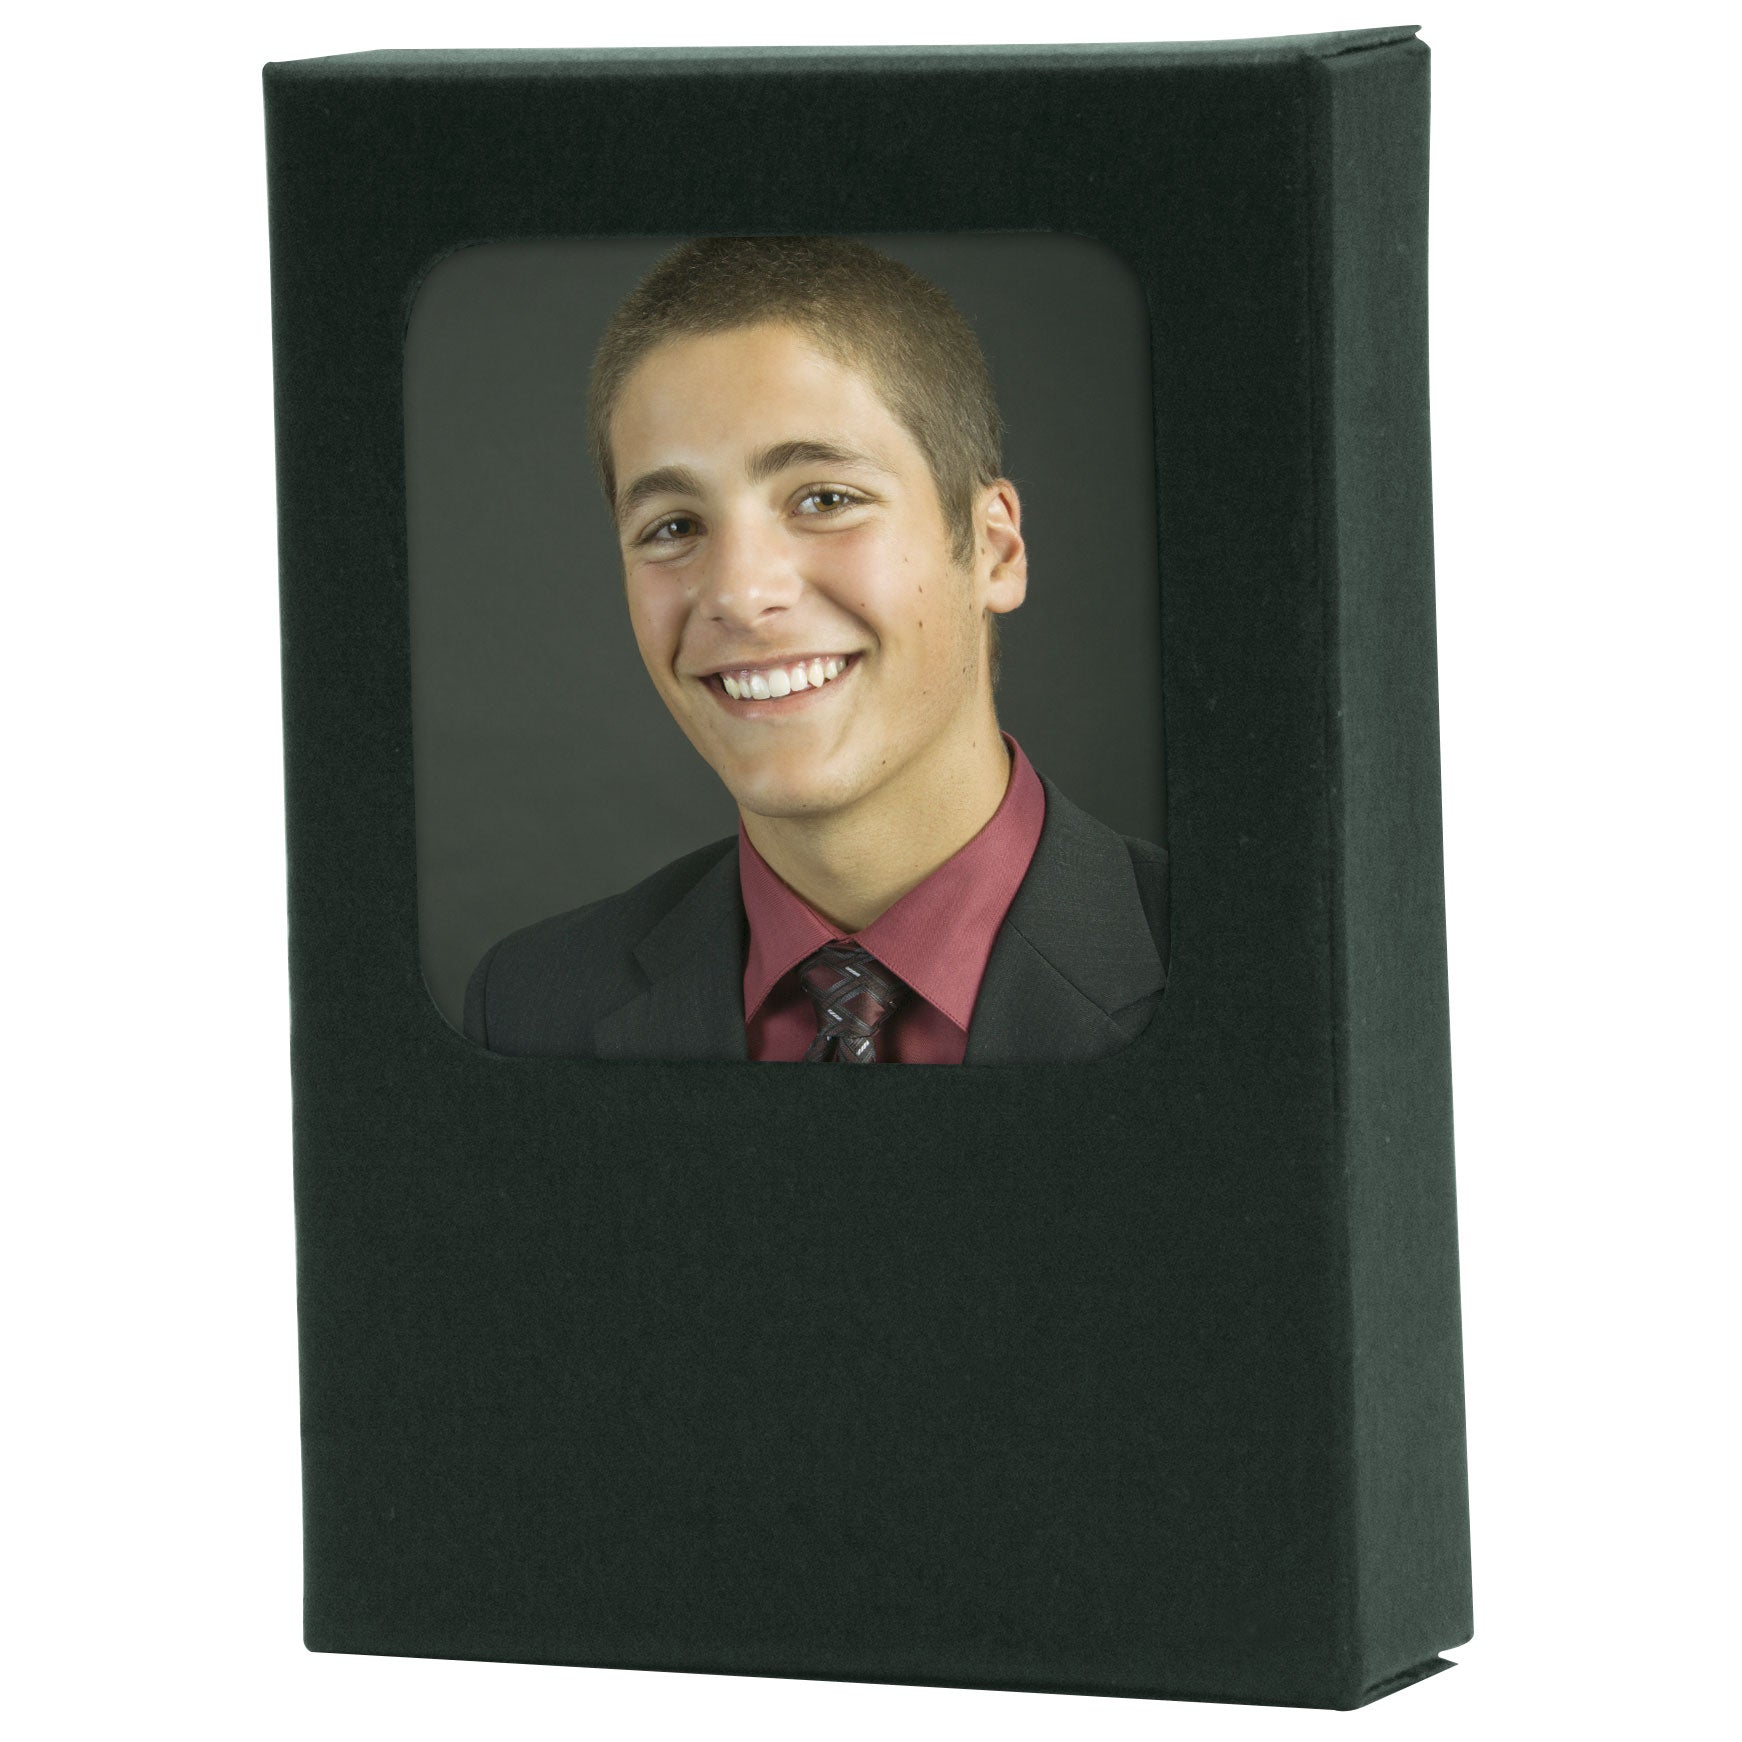 View Front Wallet Photo Box